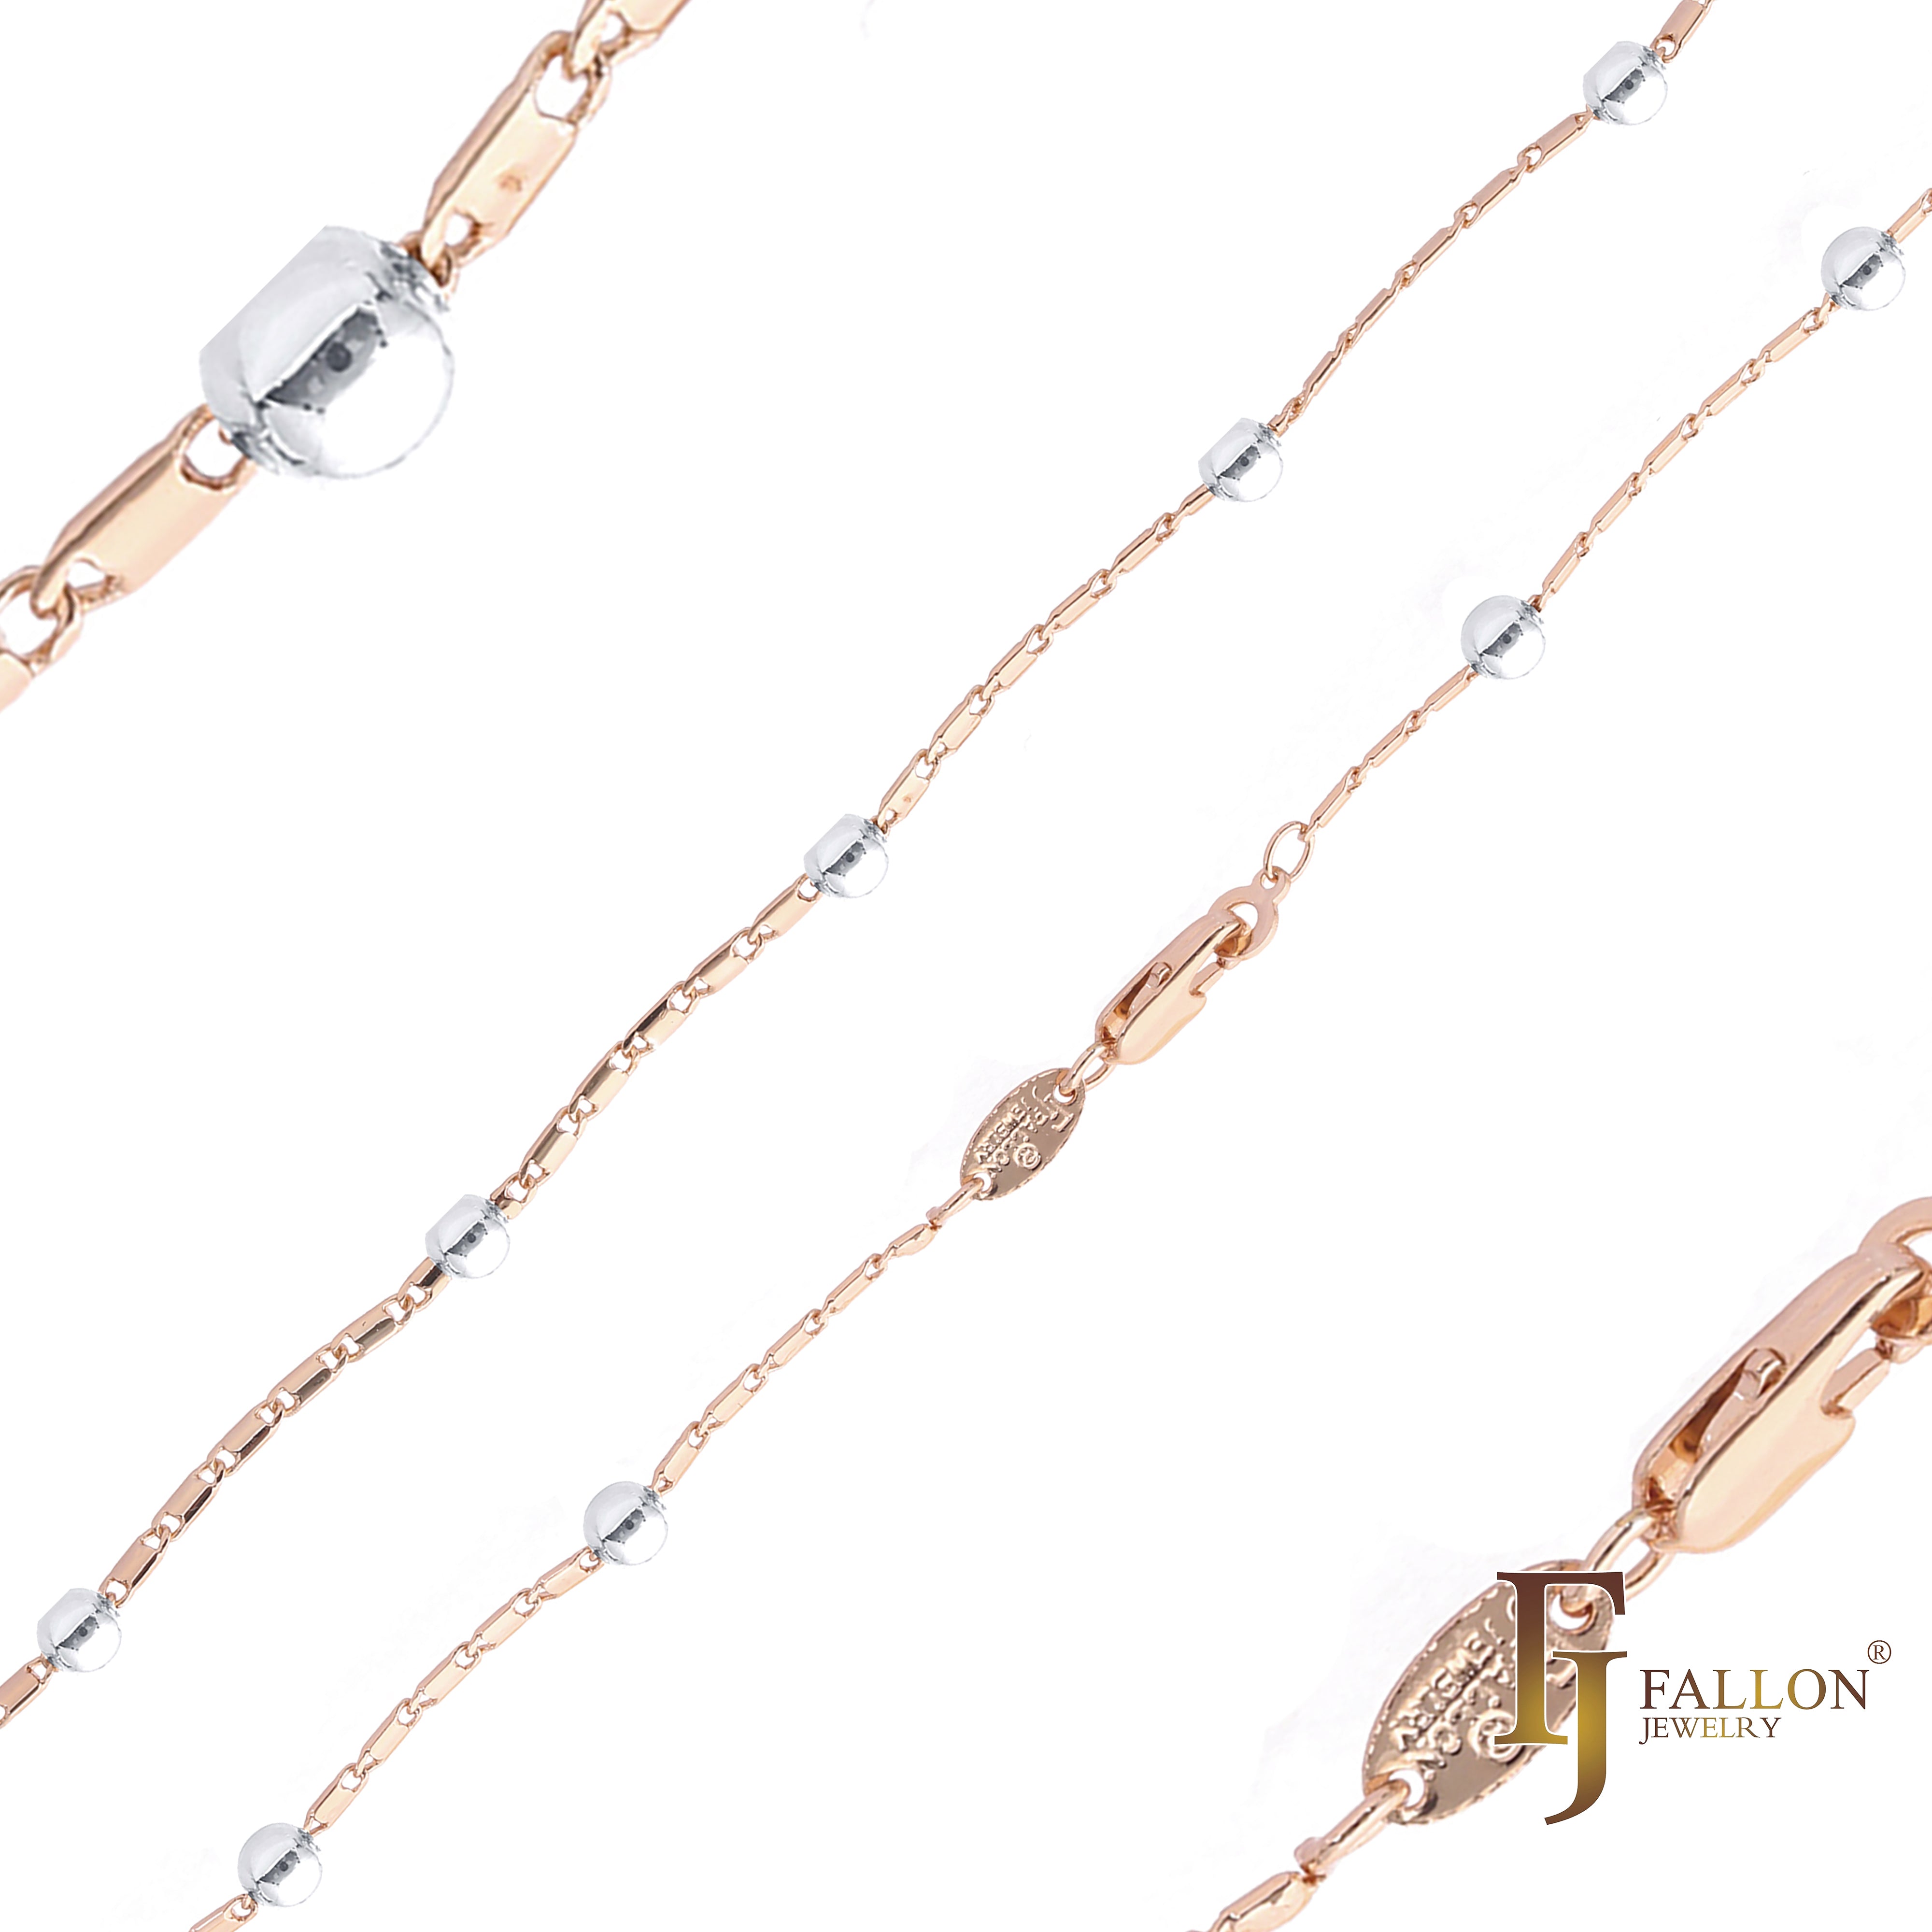 Beads Mirror link link chains plated in 14K Gold, Rose Gold, two tone